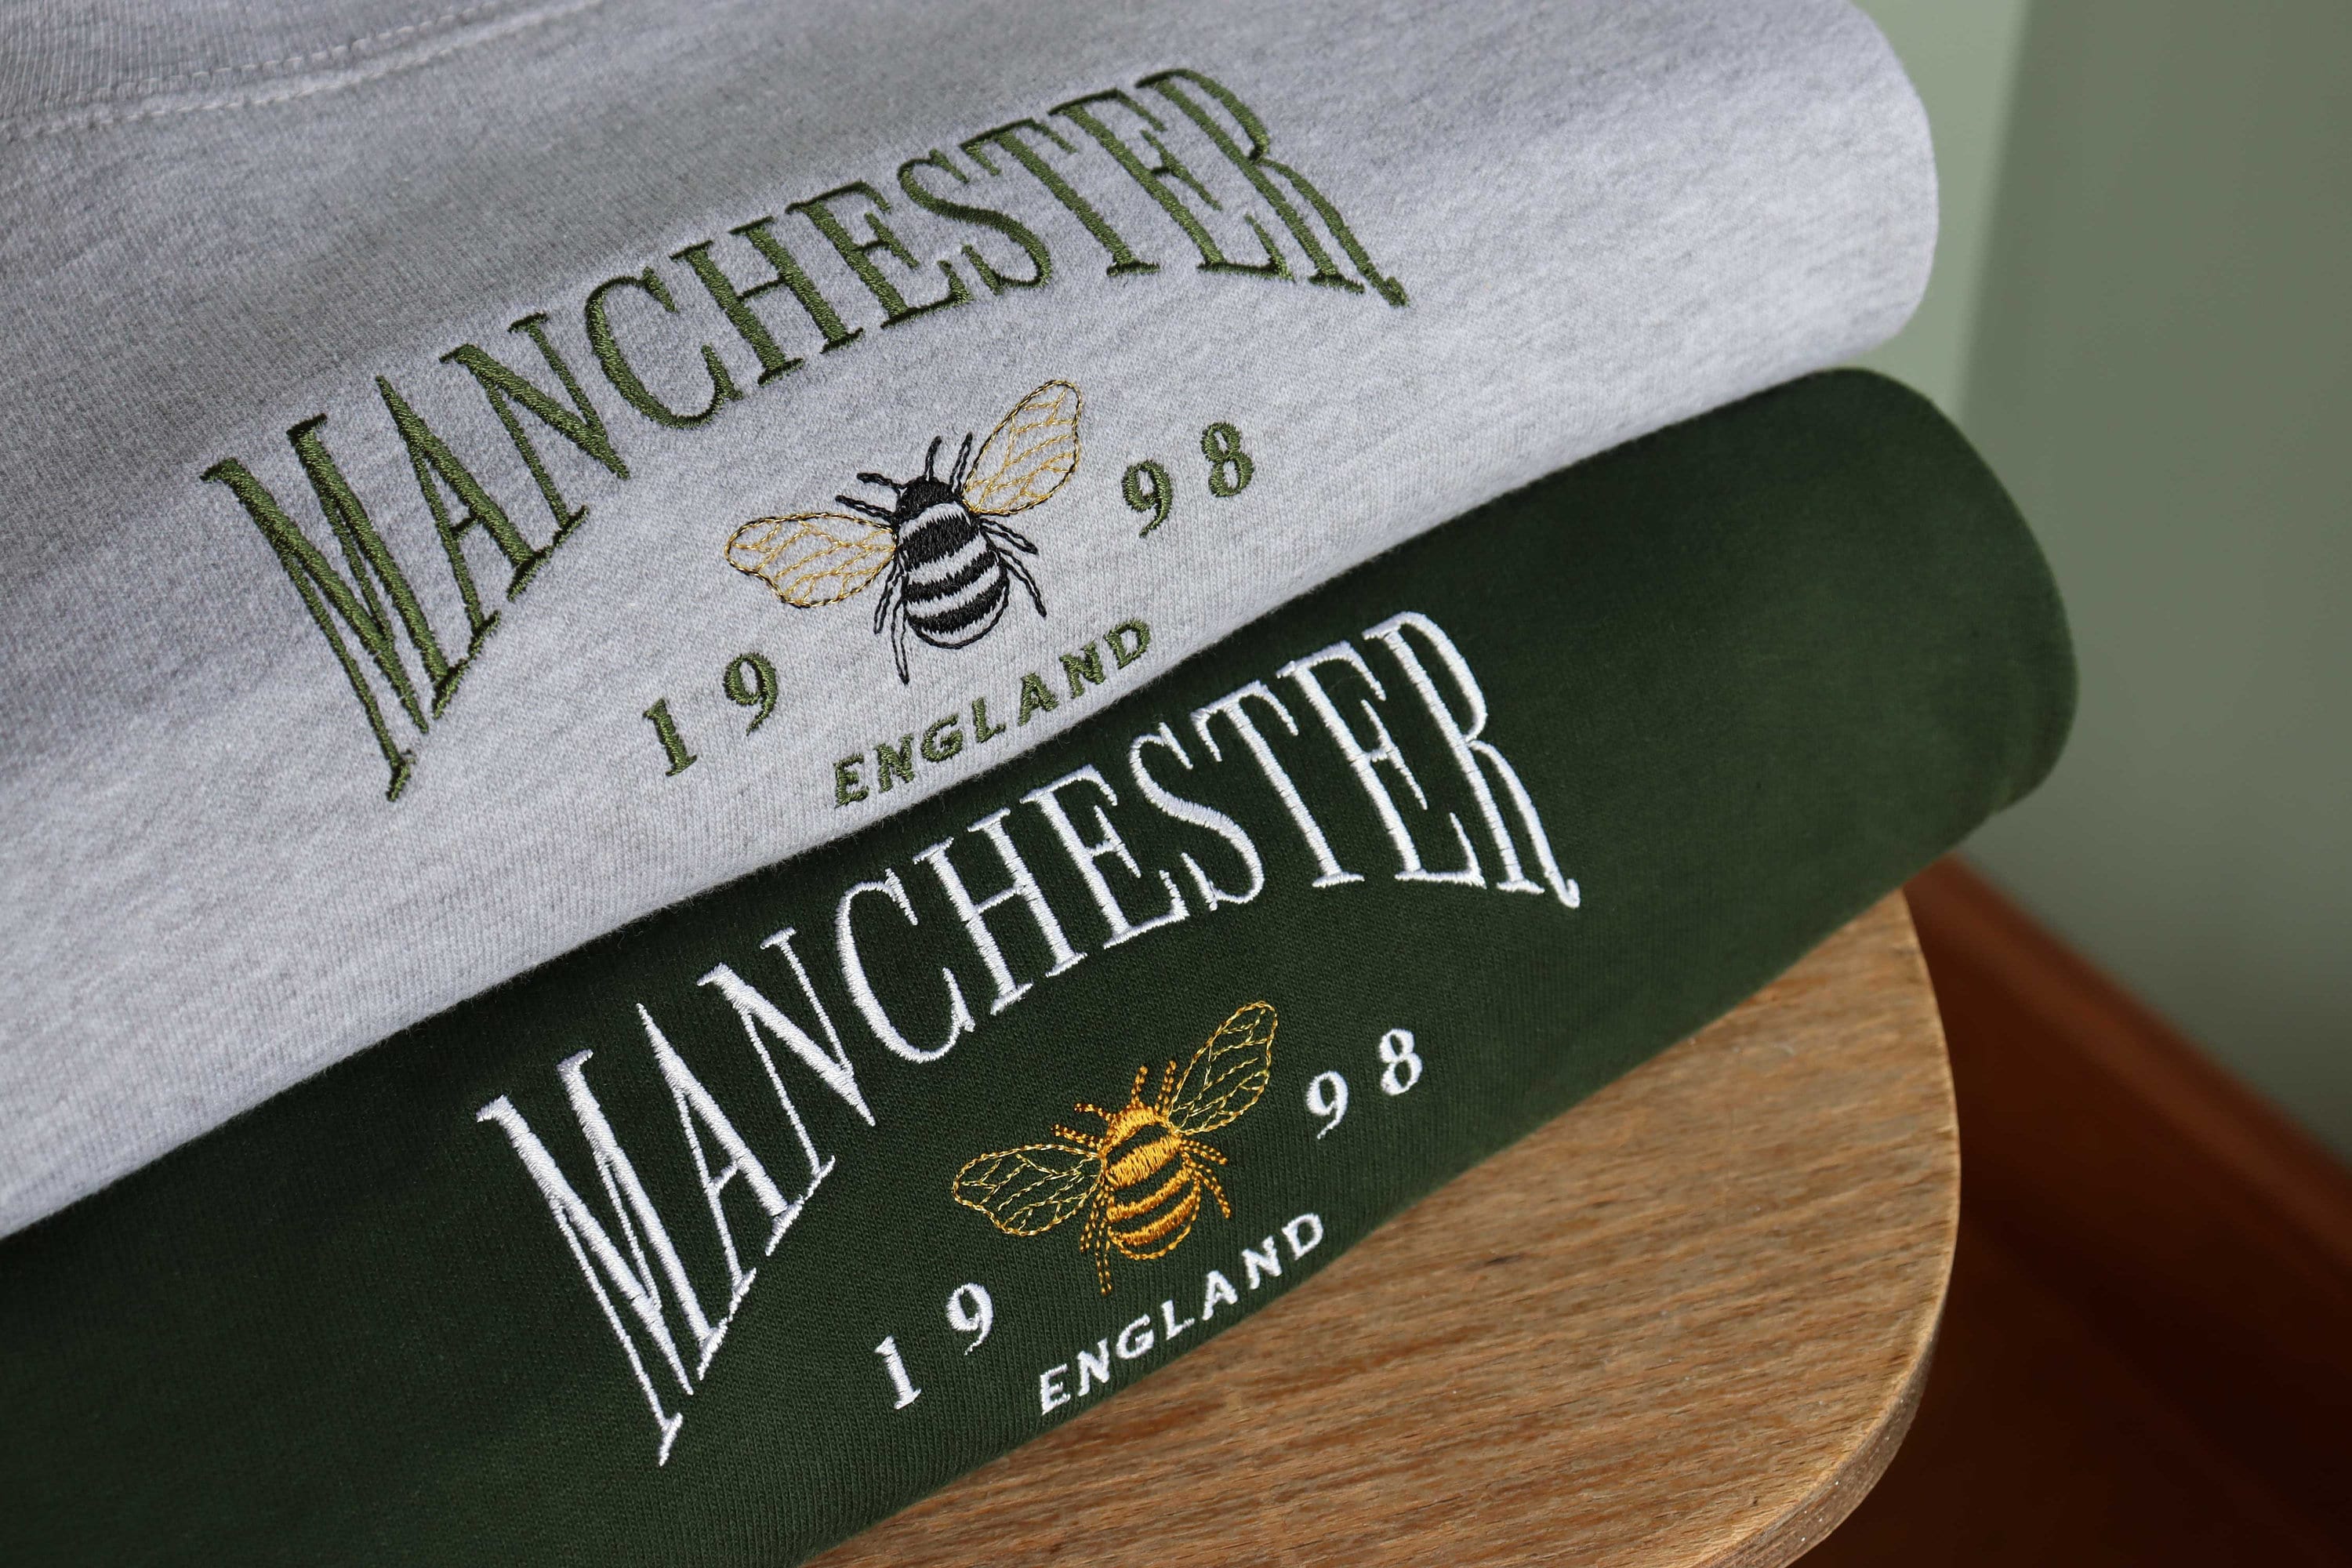 Manchester Embroidered Sweatshirt, Worker Bee, Unisex Crewneck Sweater, Bee Symbol, Eco Jumper, Embroidery, City, Vintage, Retro, Gift Ideas